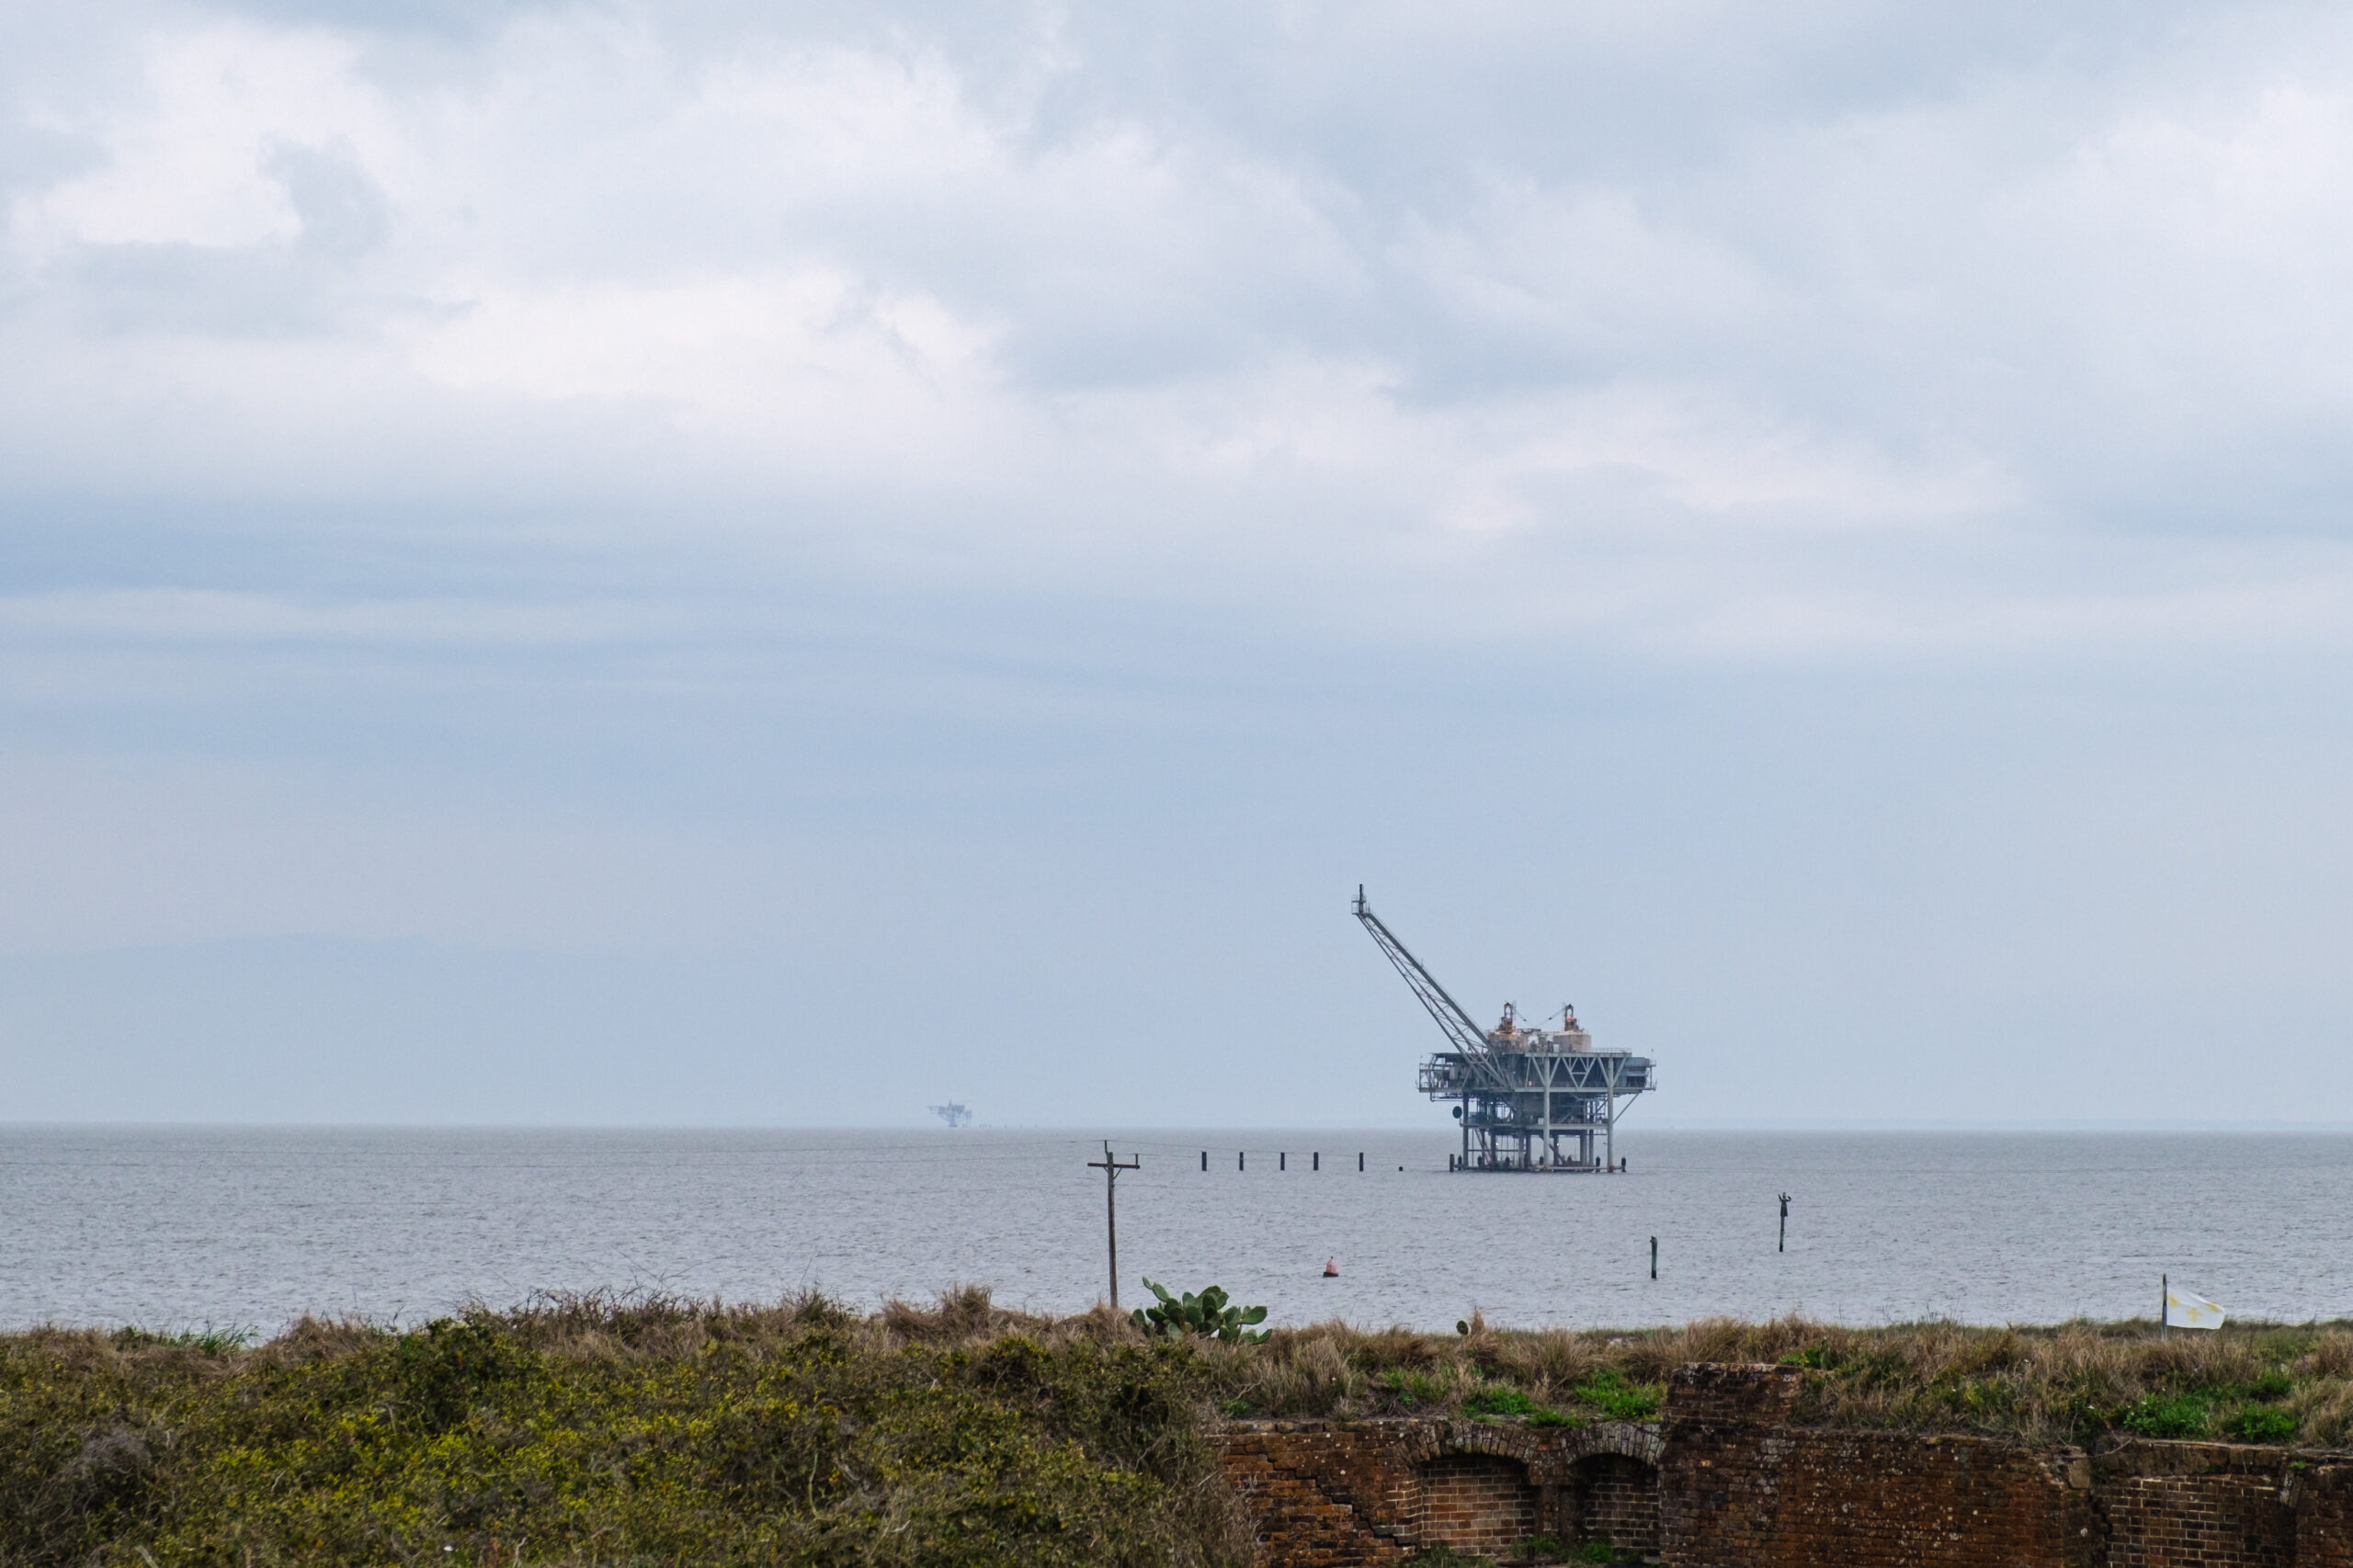 Spotlight on Gulf Coast Oil & Gas Production: 1938 to Today